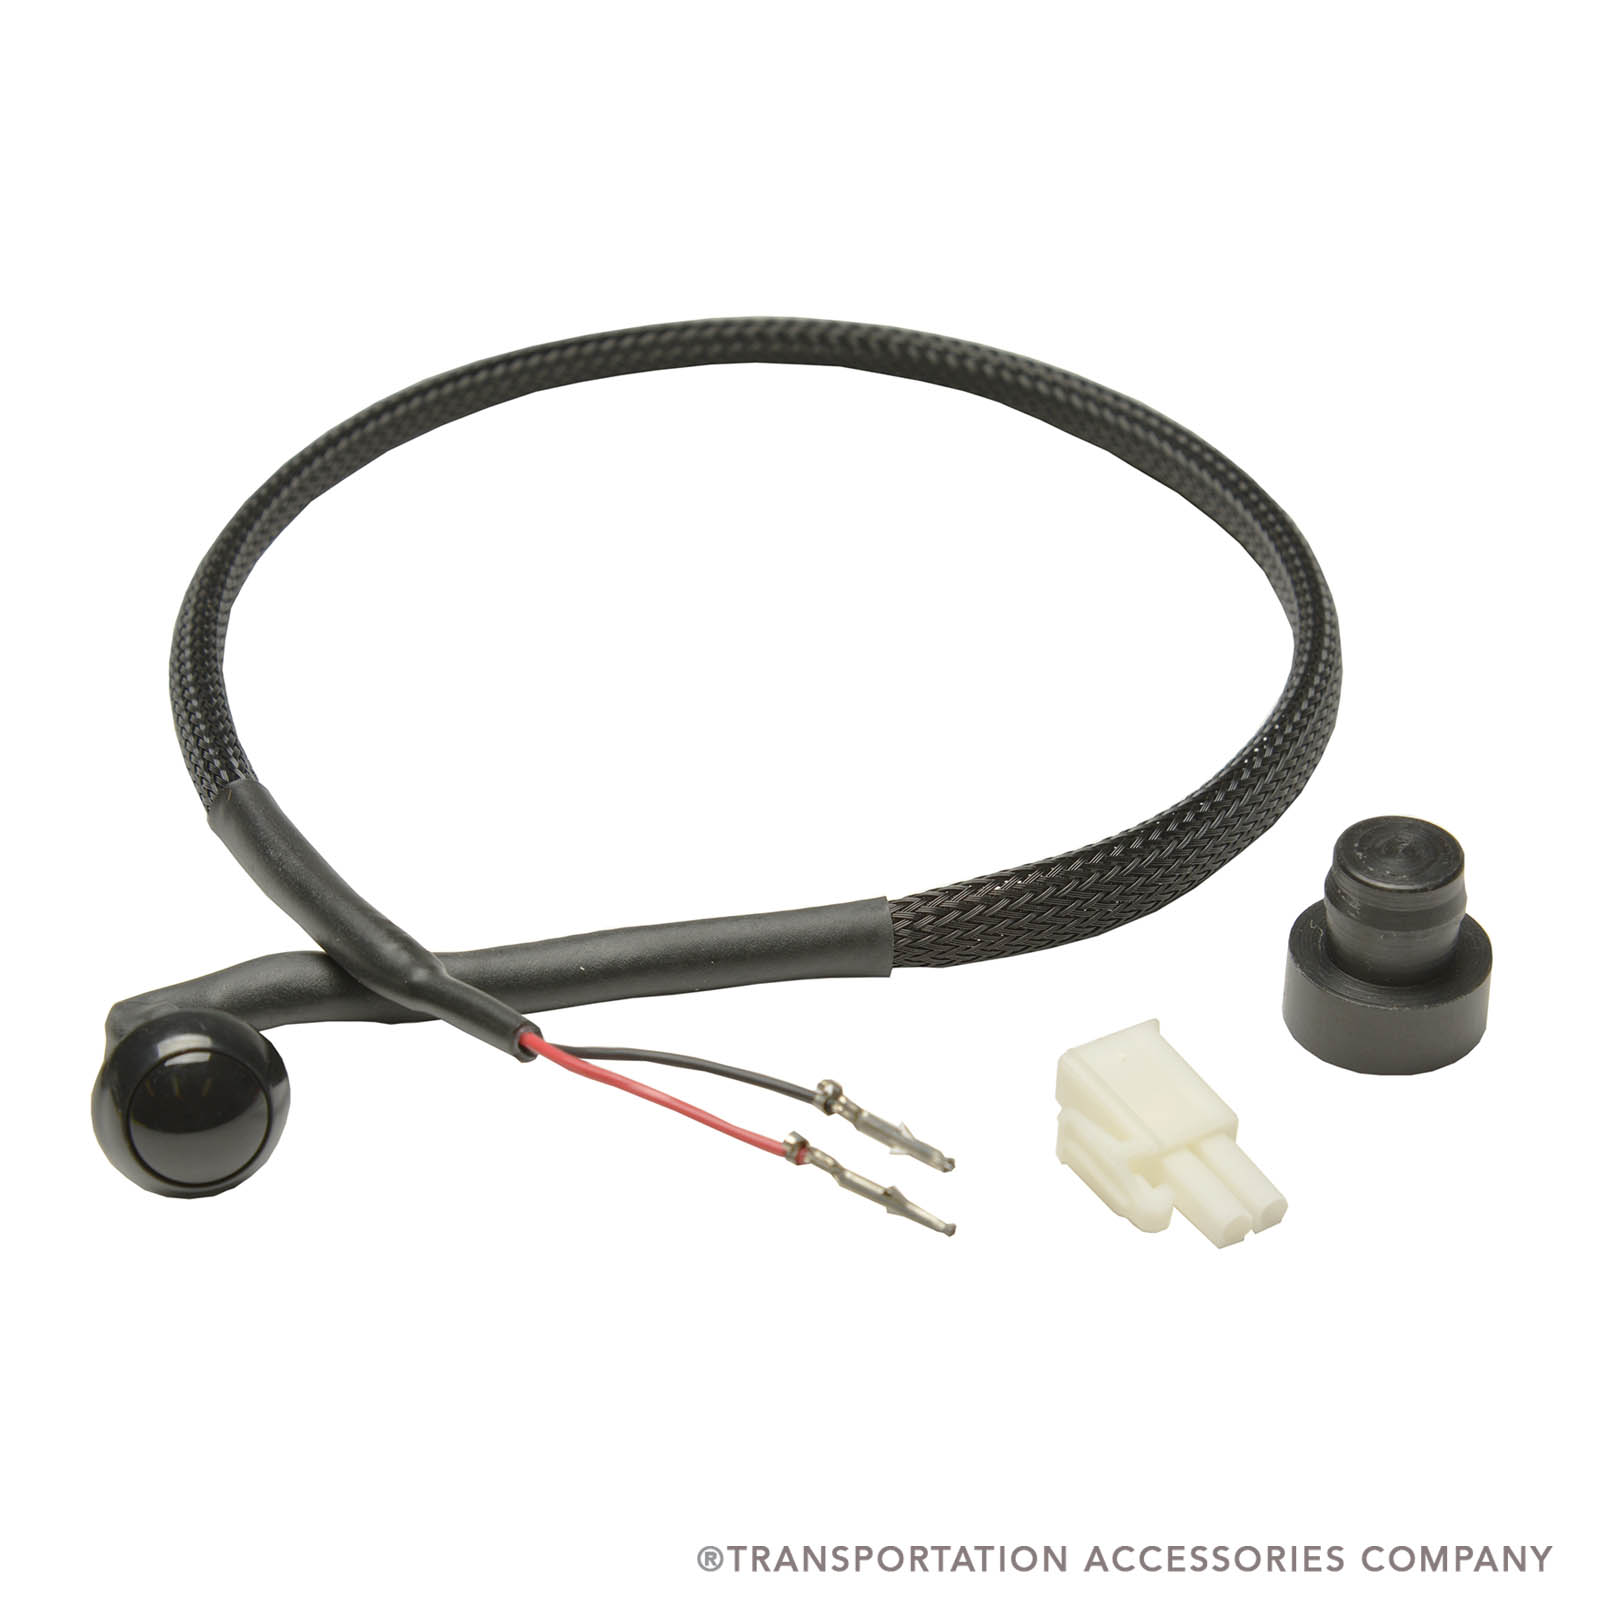 32519KS Ship-Out Kit for IB Up Switch for Braun Lift